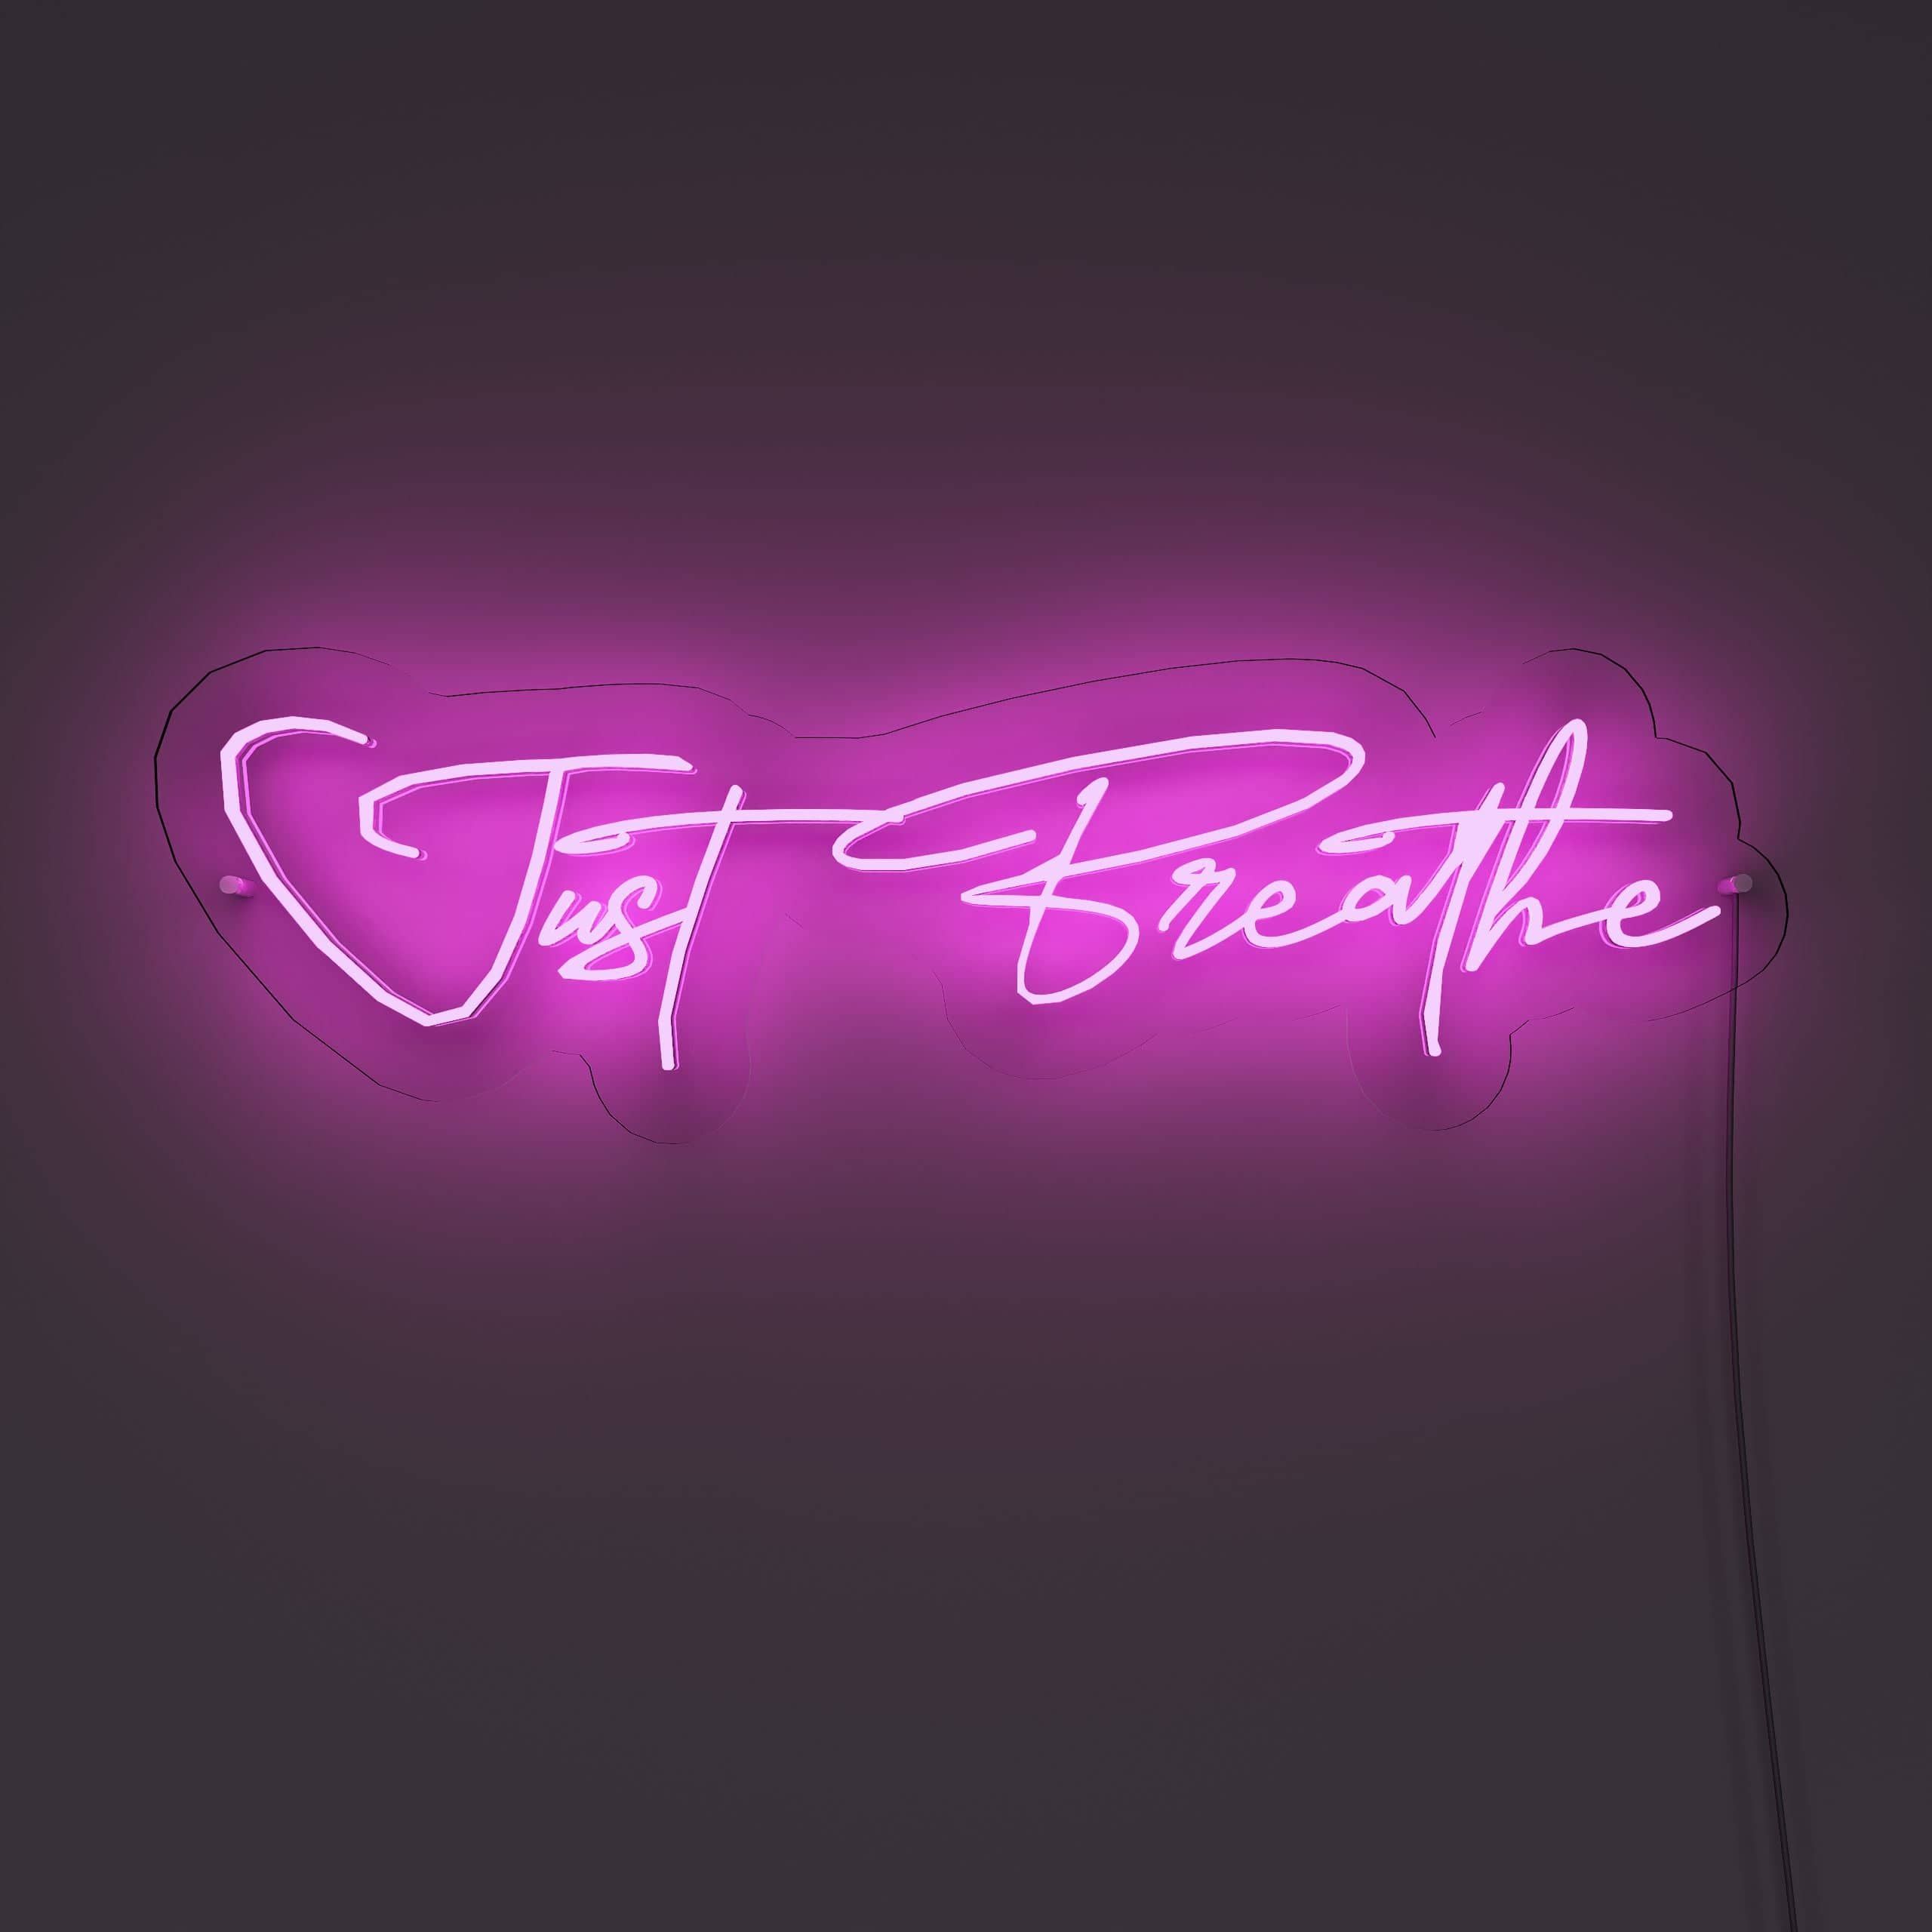 connect-with-your-inner-self-through-breath-neon-sign-lite